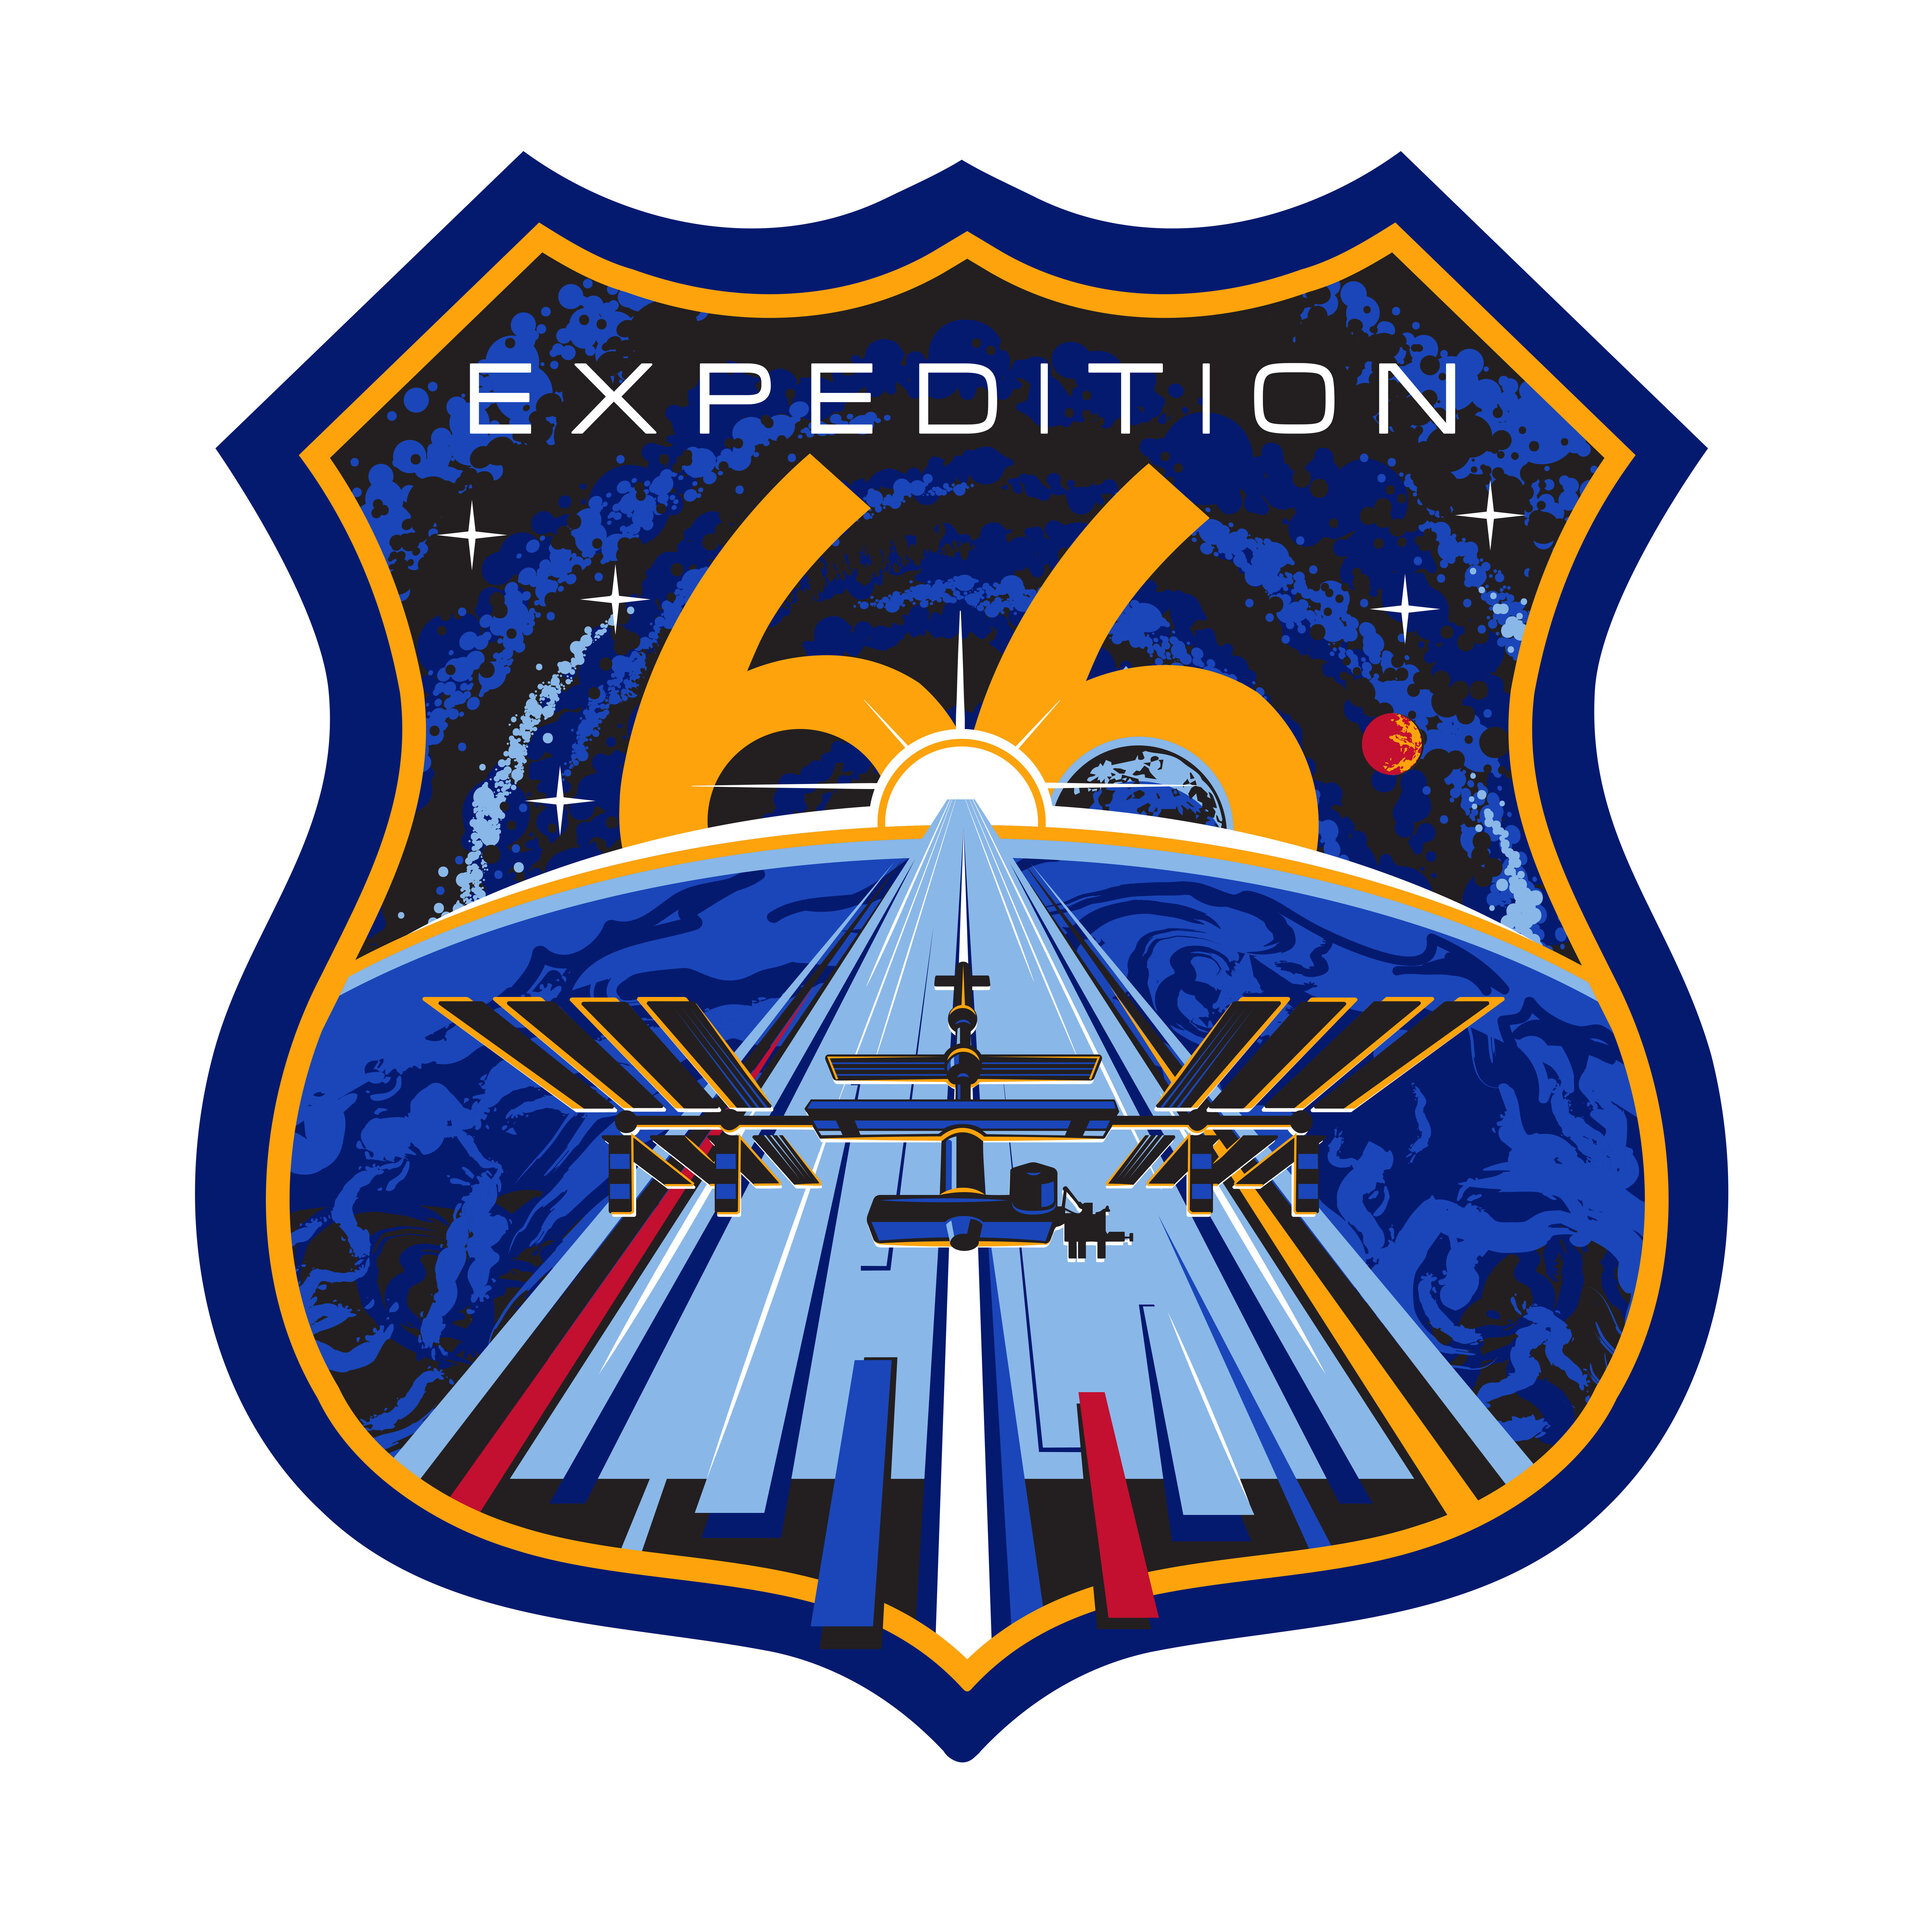 ISS Expedition 66, 2021